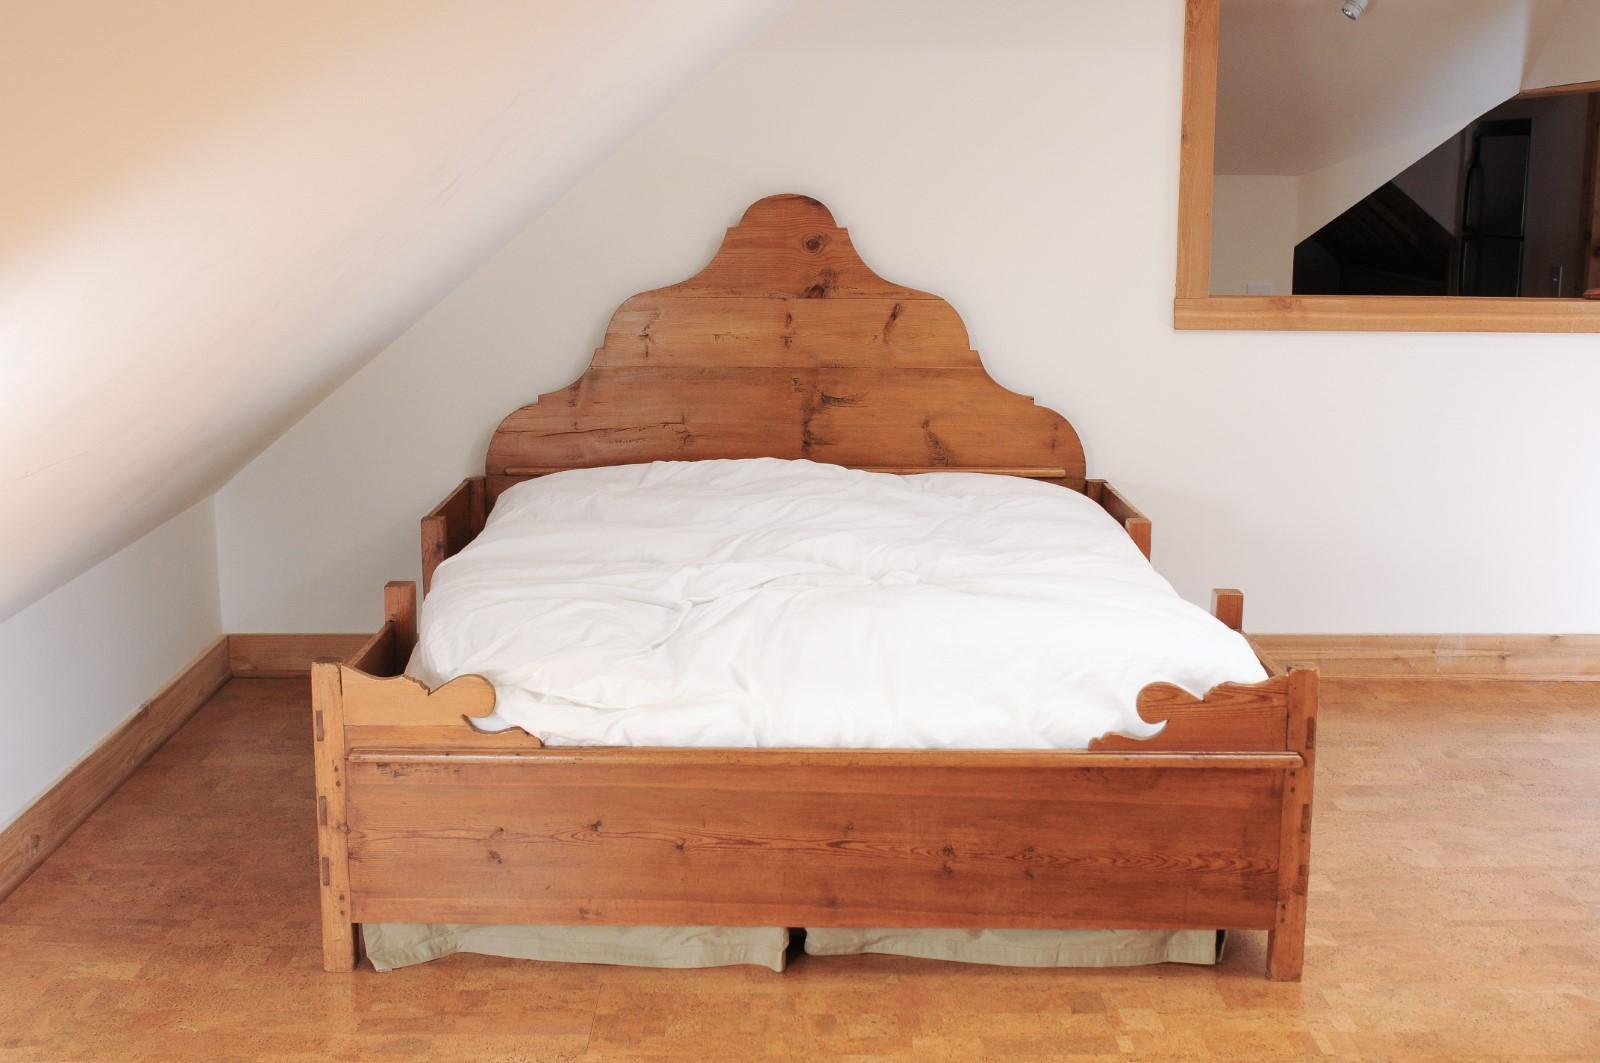 A rustic Scandinavian fir bed from the mid-19th century, with tall scrolling headboard, custom mattress and box spring. Created in Sweden during the second quarter of the 19th century, this fir bed attracts our attention with its rustic appearance